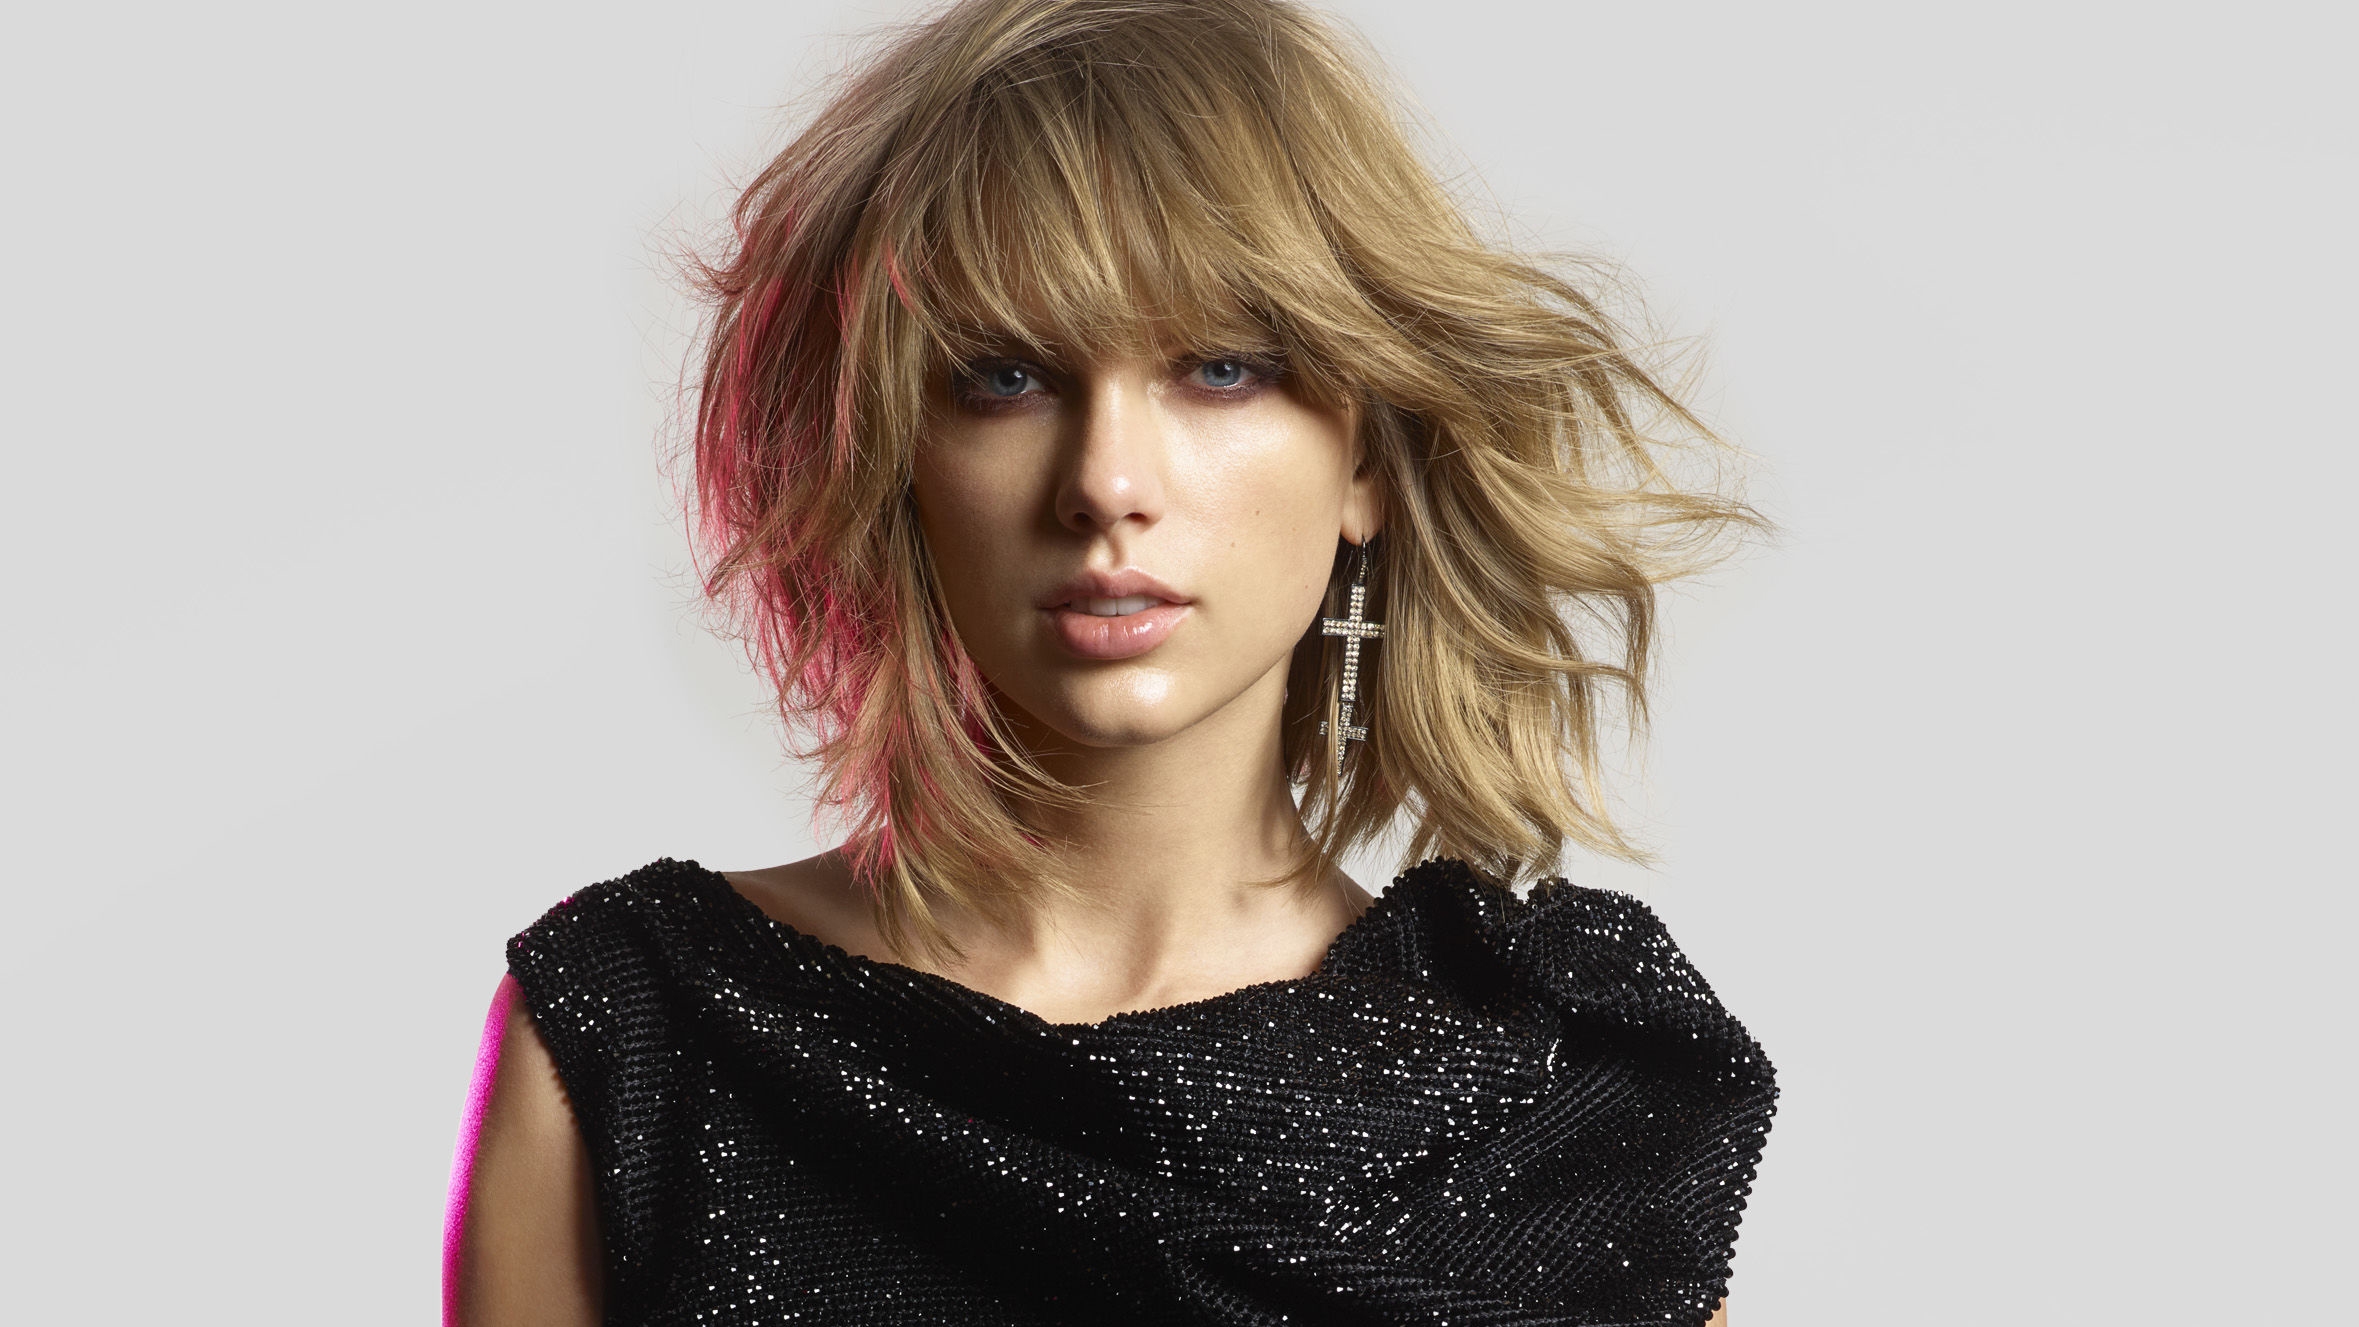 4. "Taylor Swift's Best Blonde Hair Moments" - wide 5